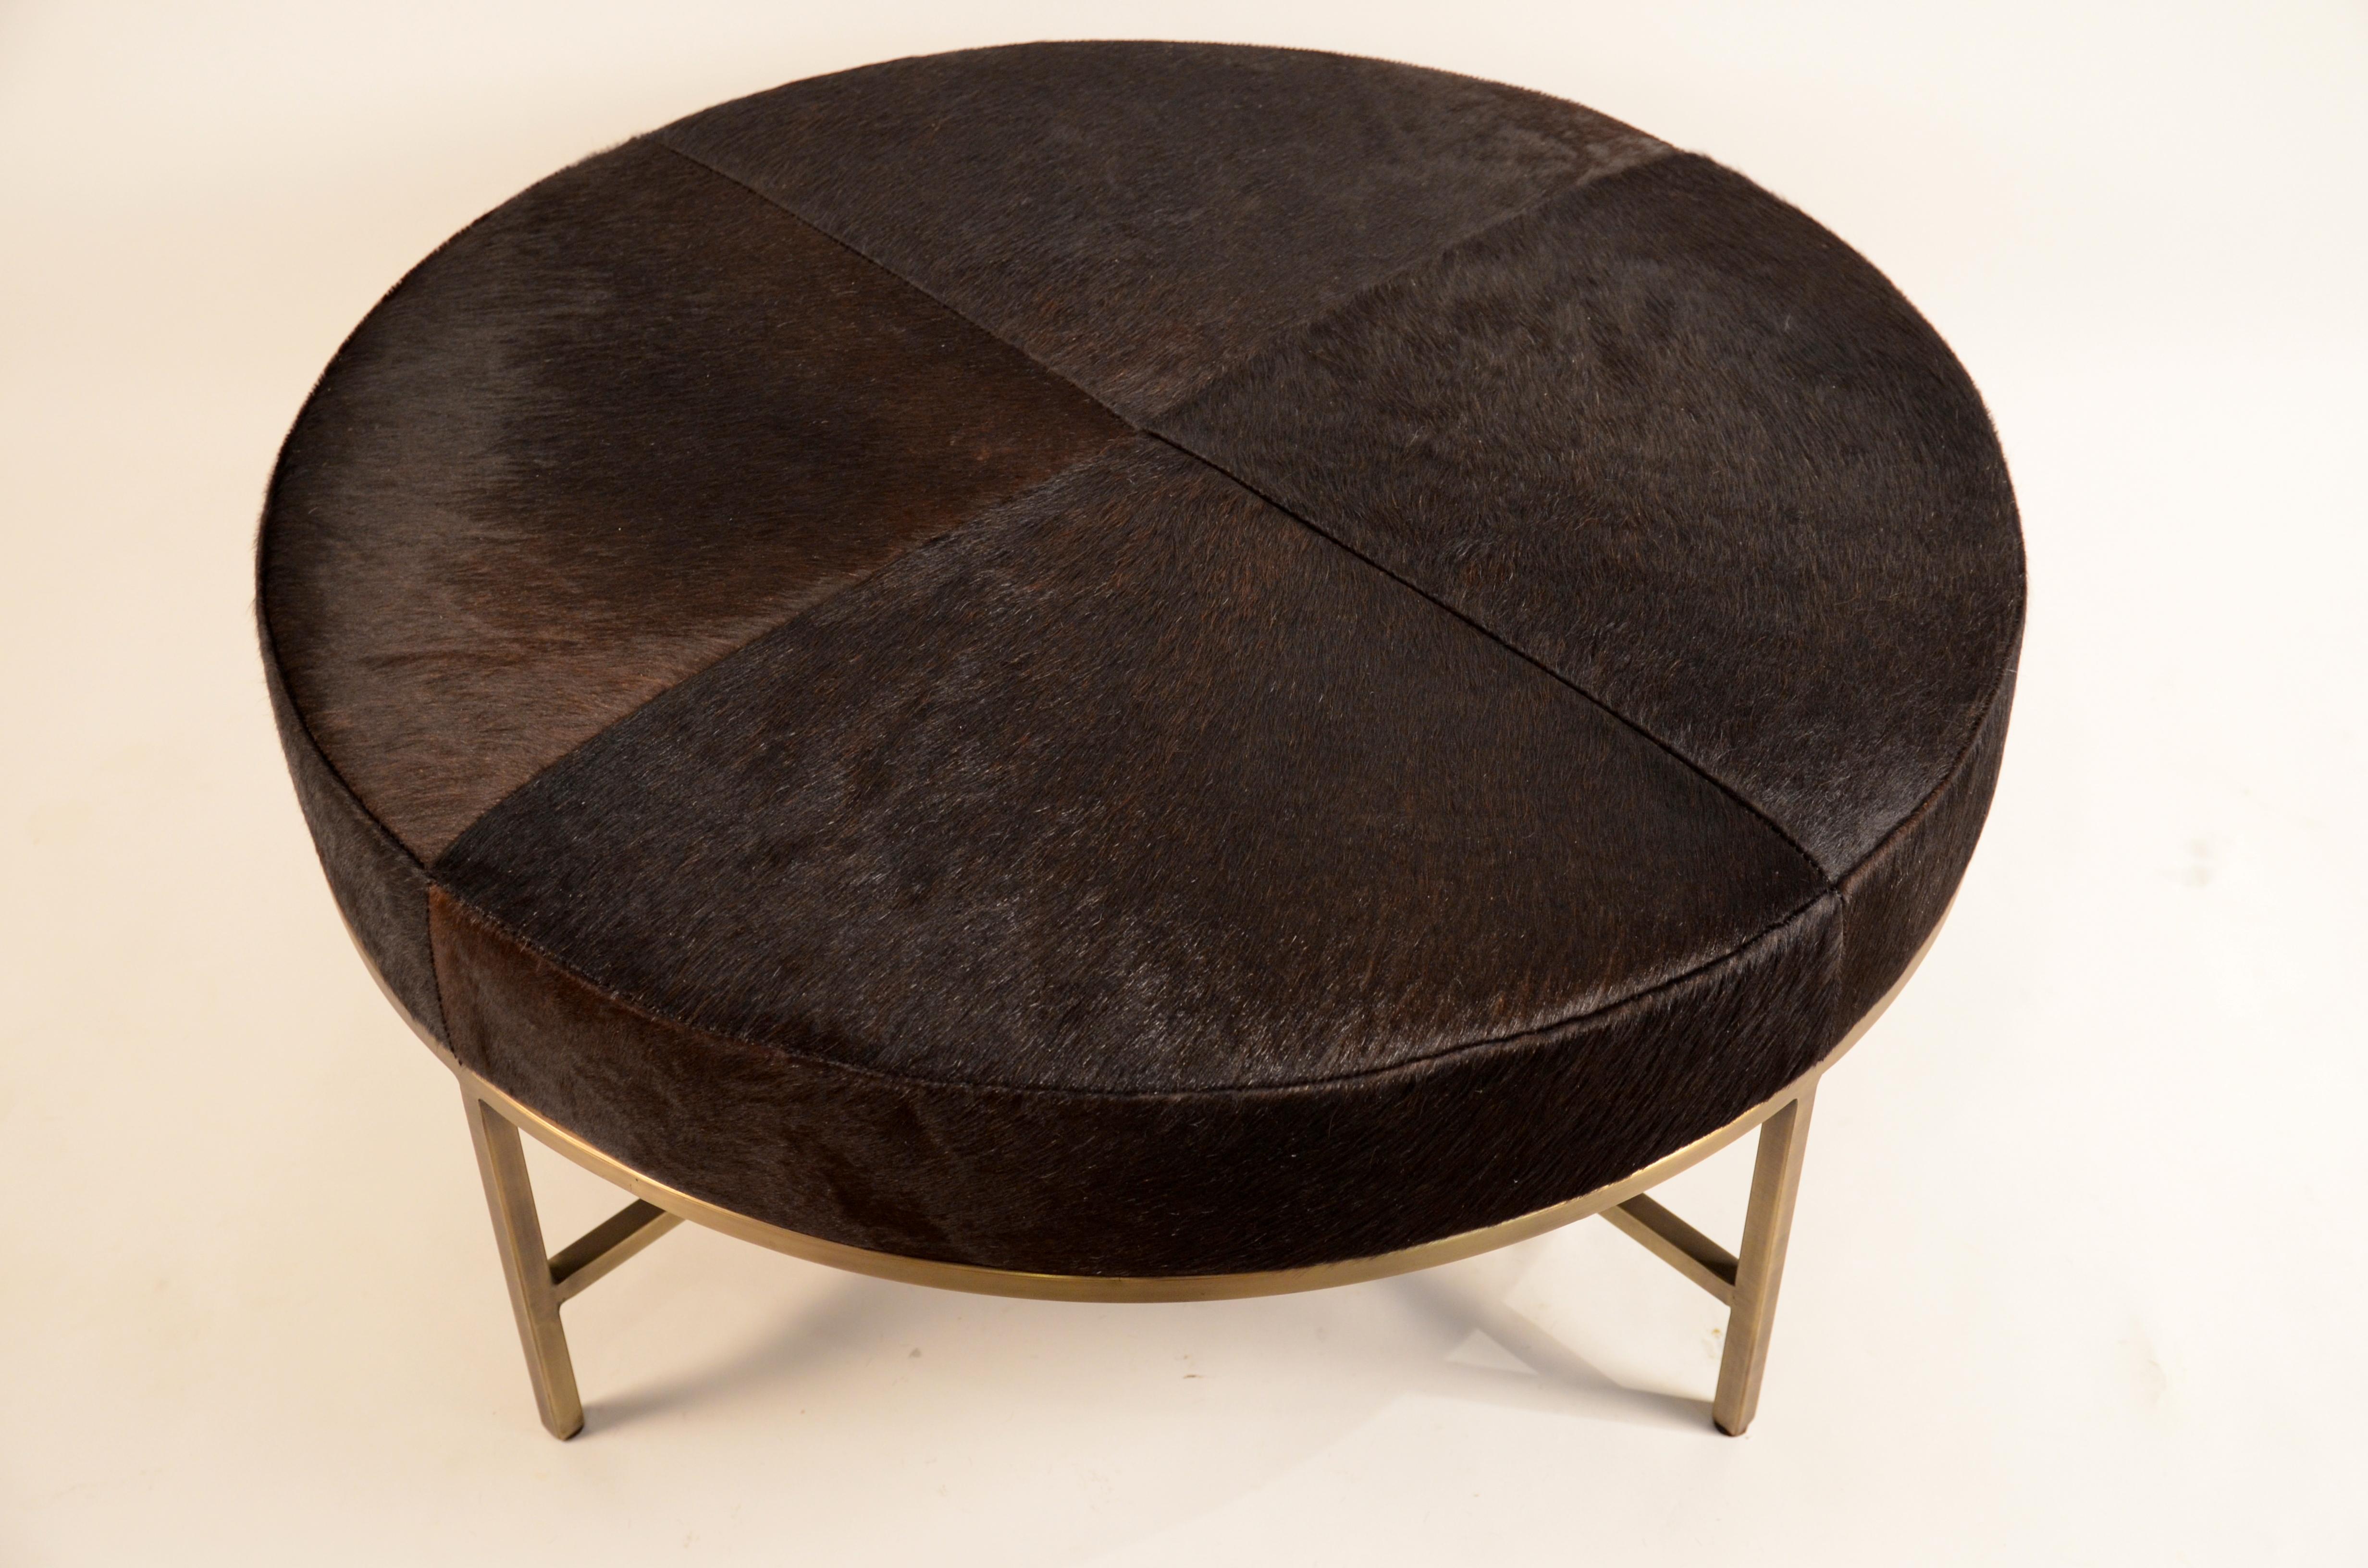 American Medium 'Tambour' Ottoman by Design Frères For Sale